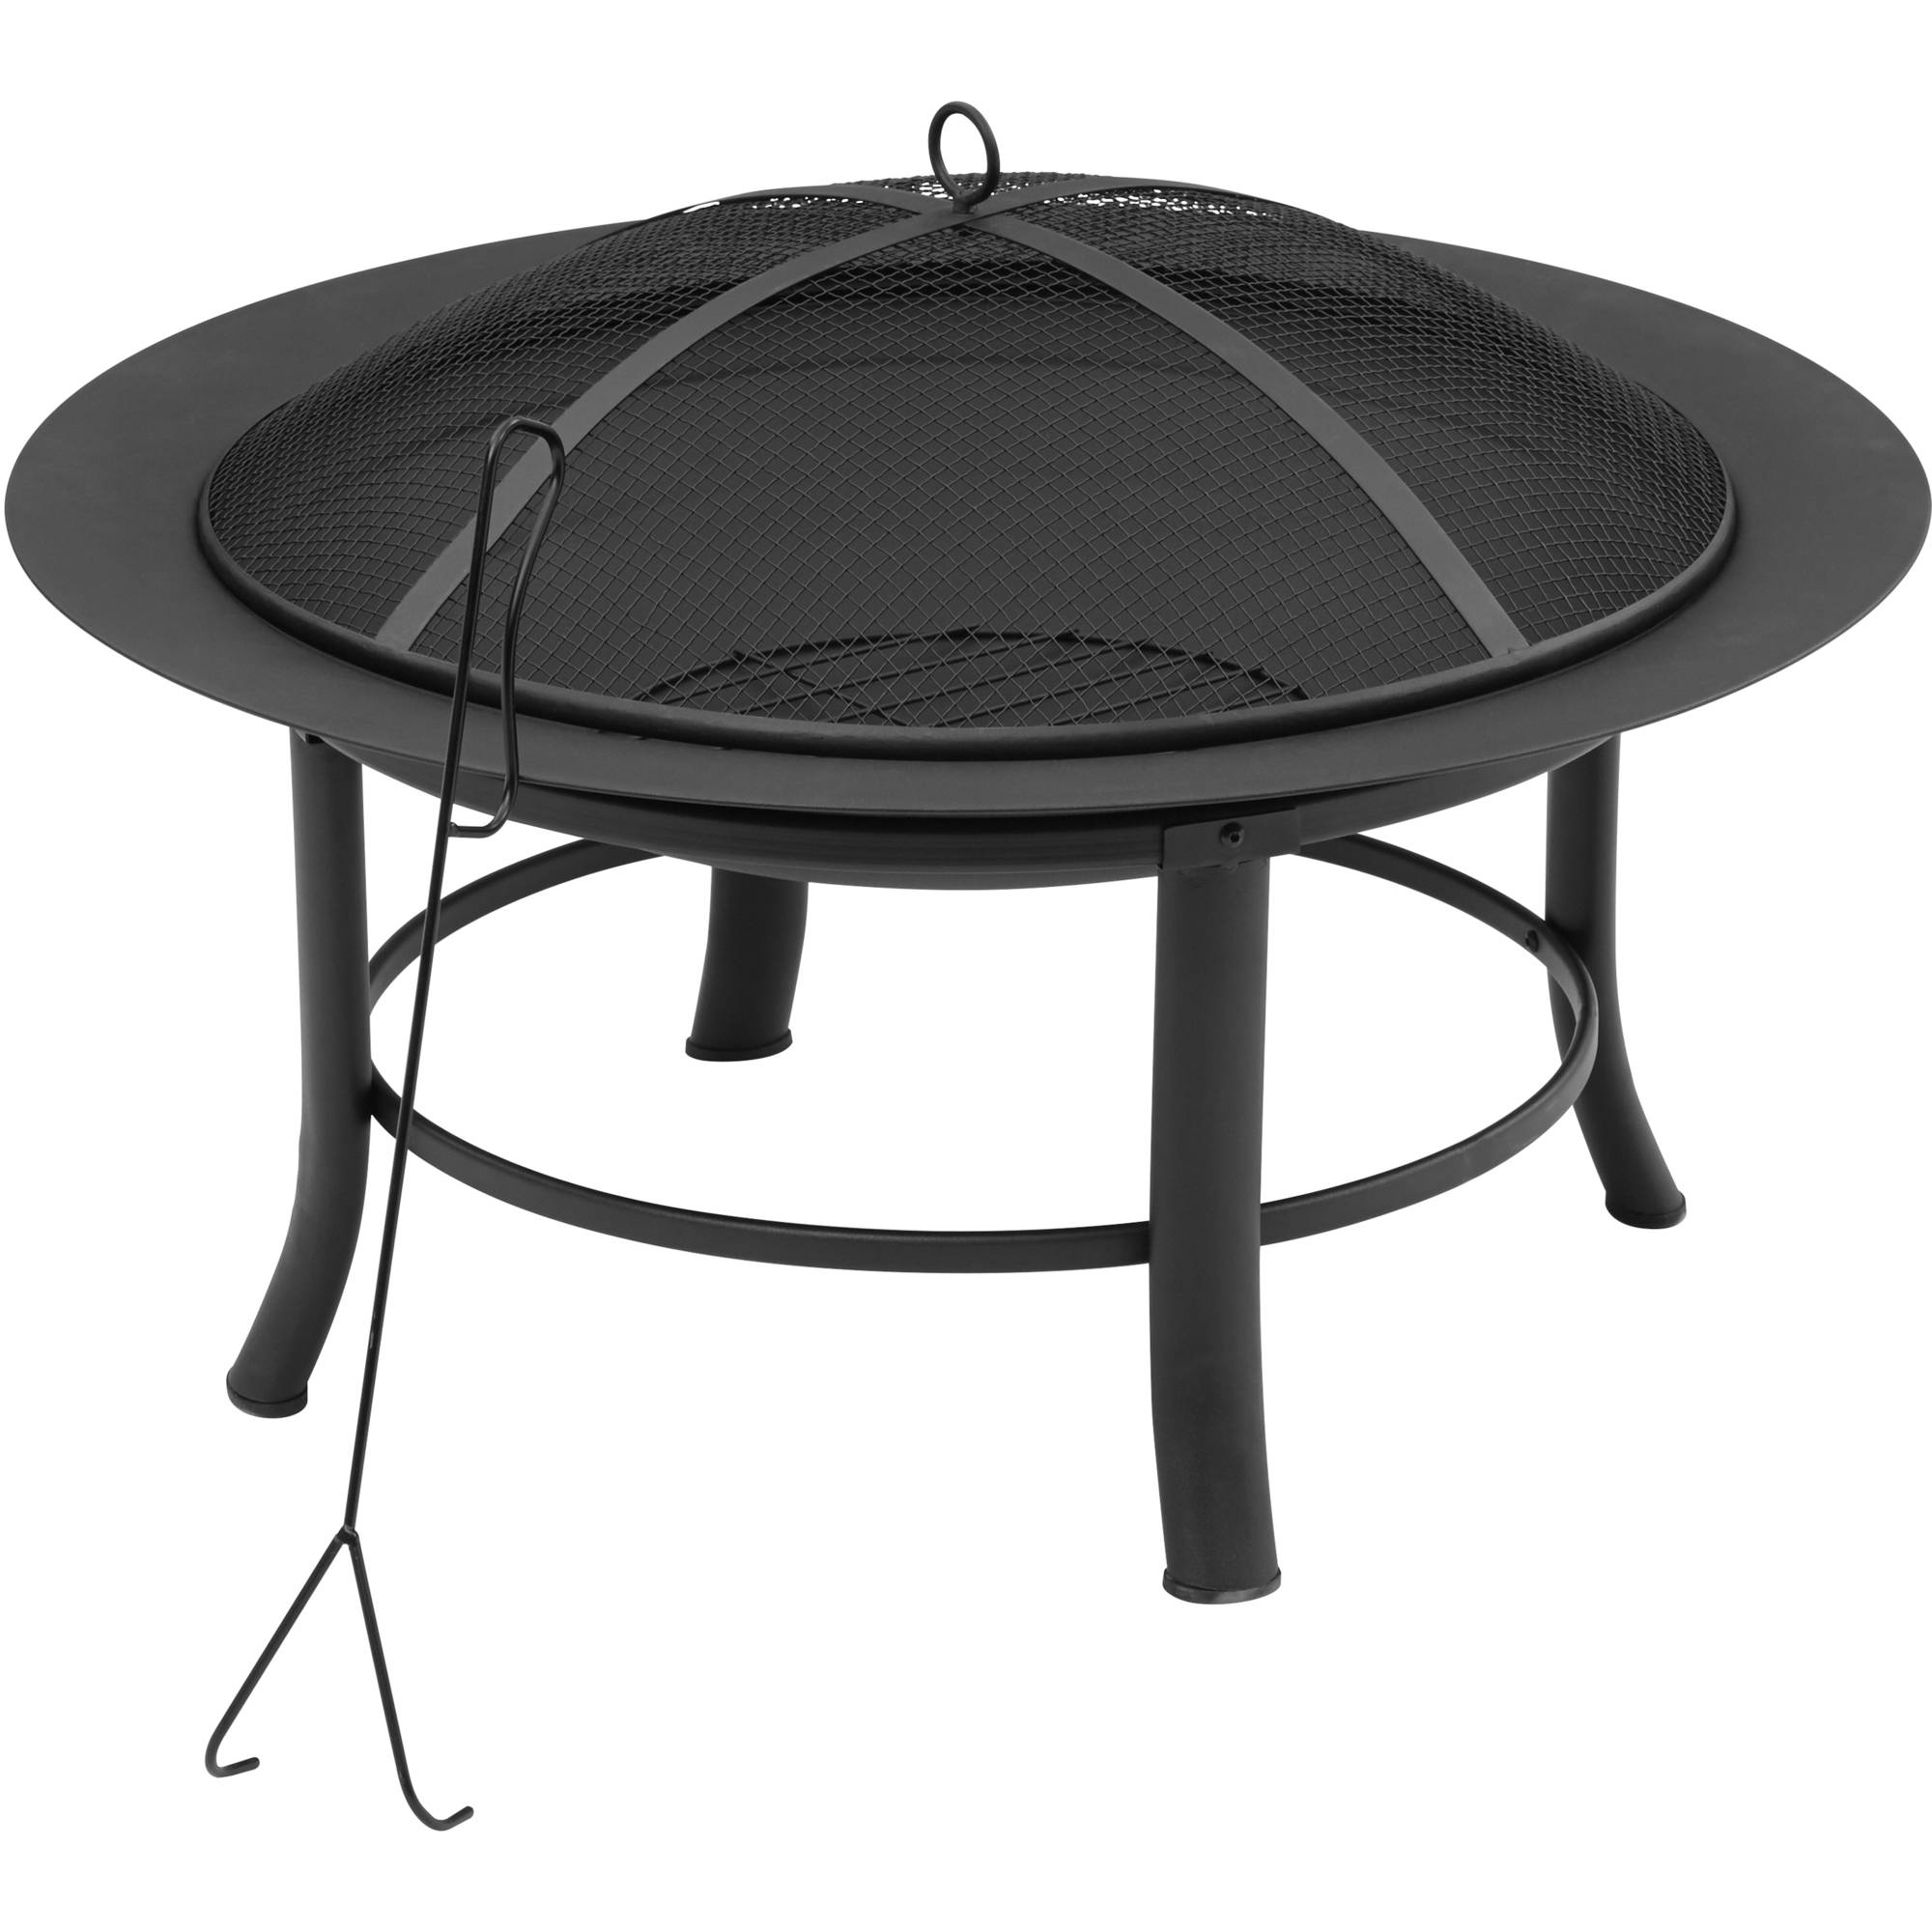 Mainstays 28" Fire Pit with PVC Cover and Spark Guard - image 1 of 11